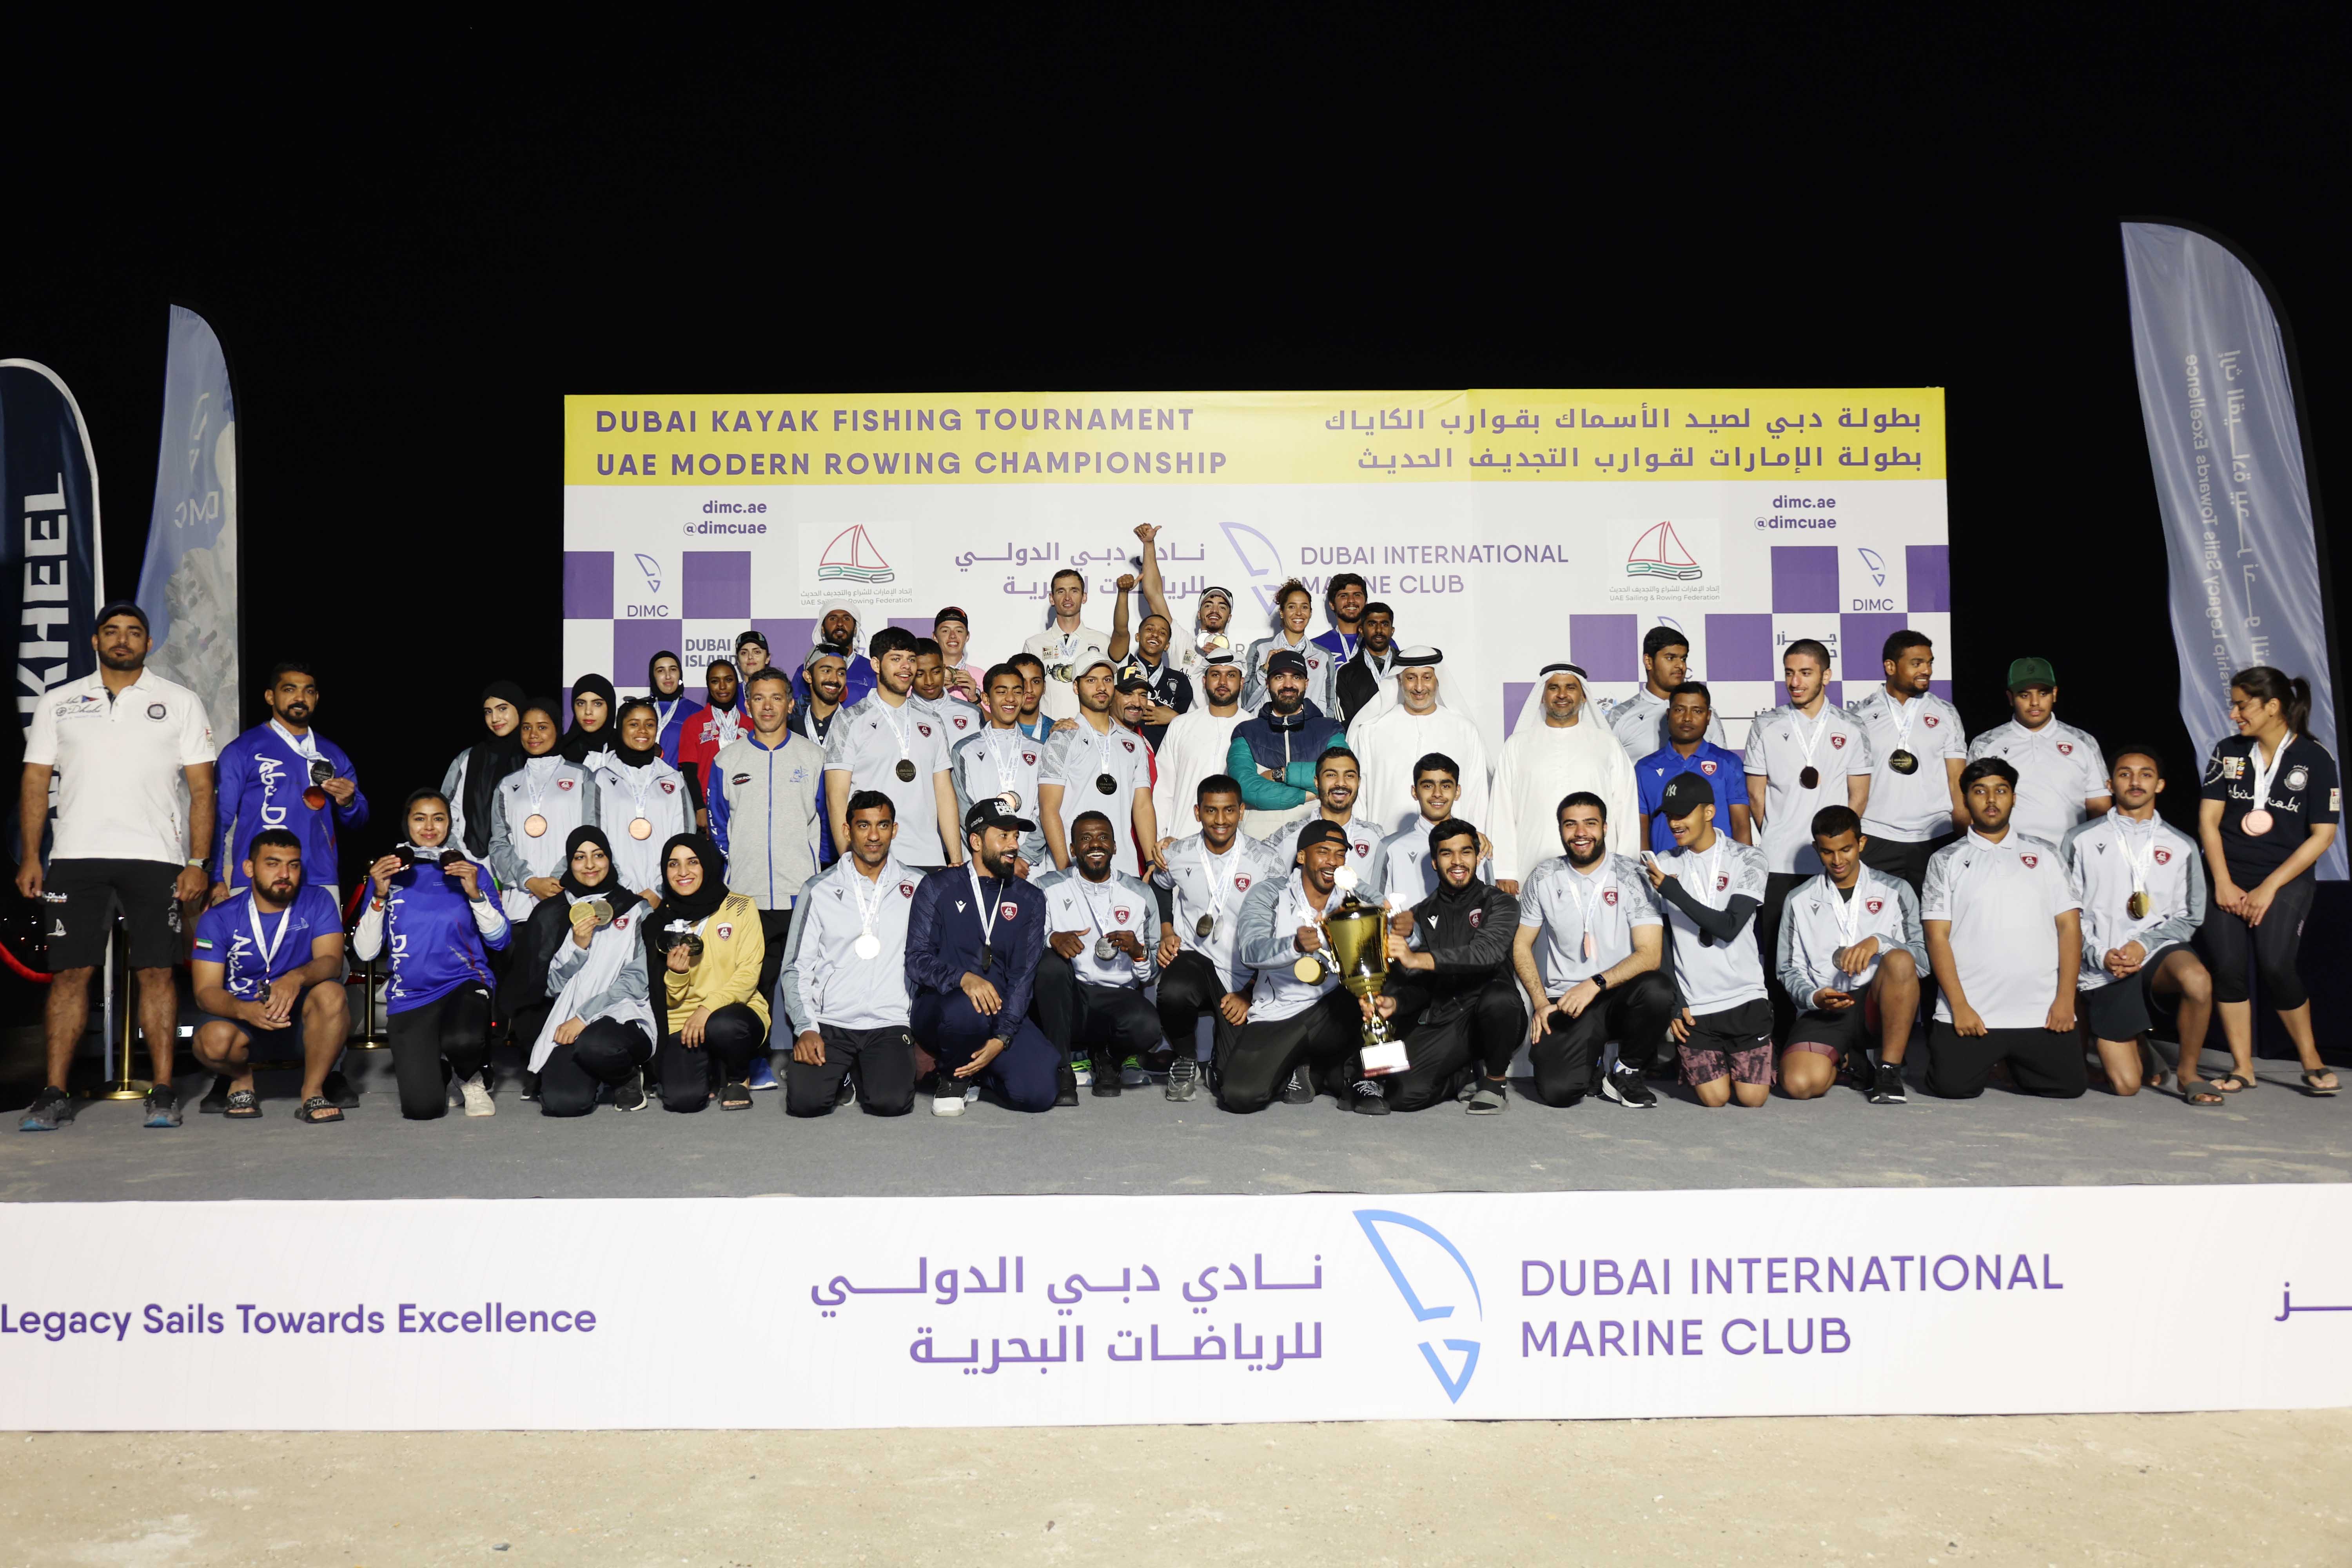 Al Hamriyah Won the Overall in the UAE Rowing Championship